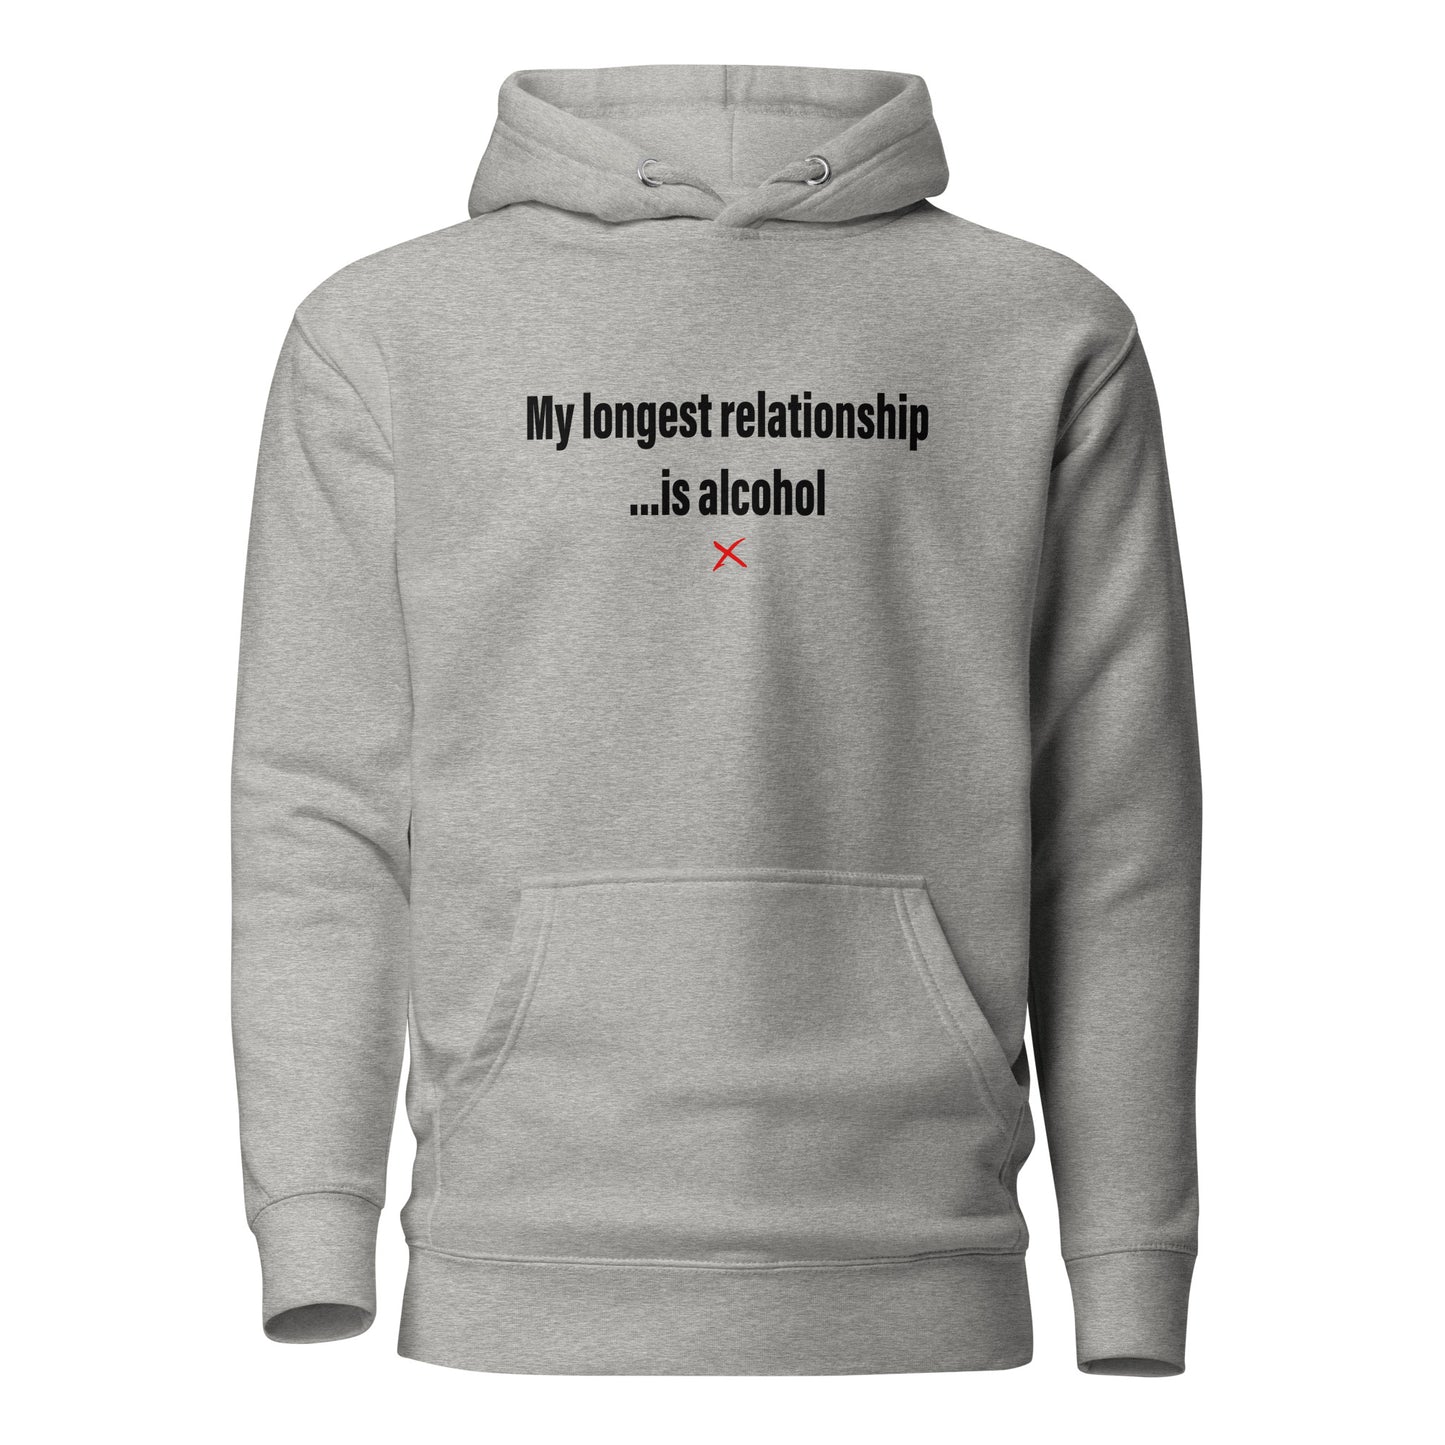 My longest relationship ...is alcohol - Hoodie